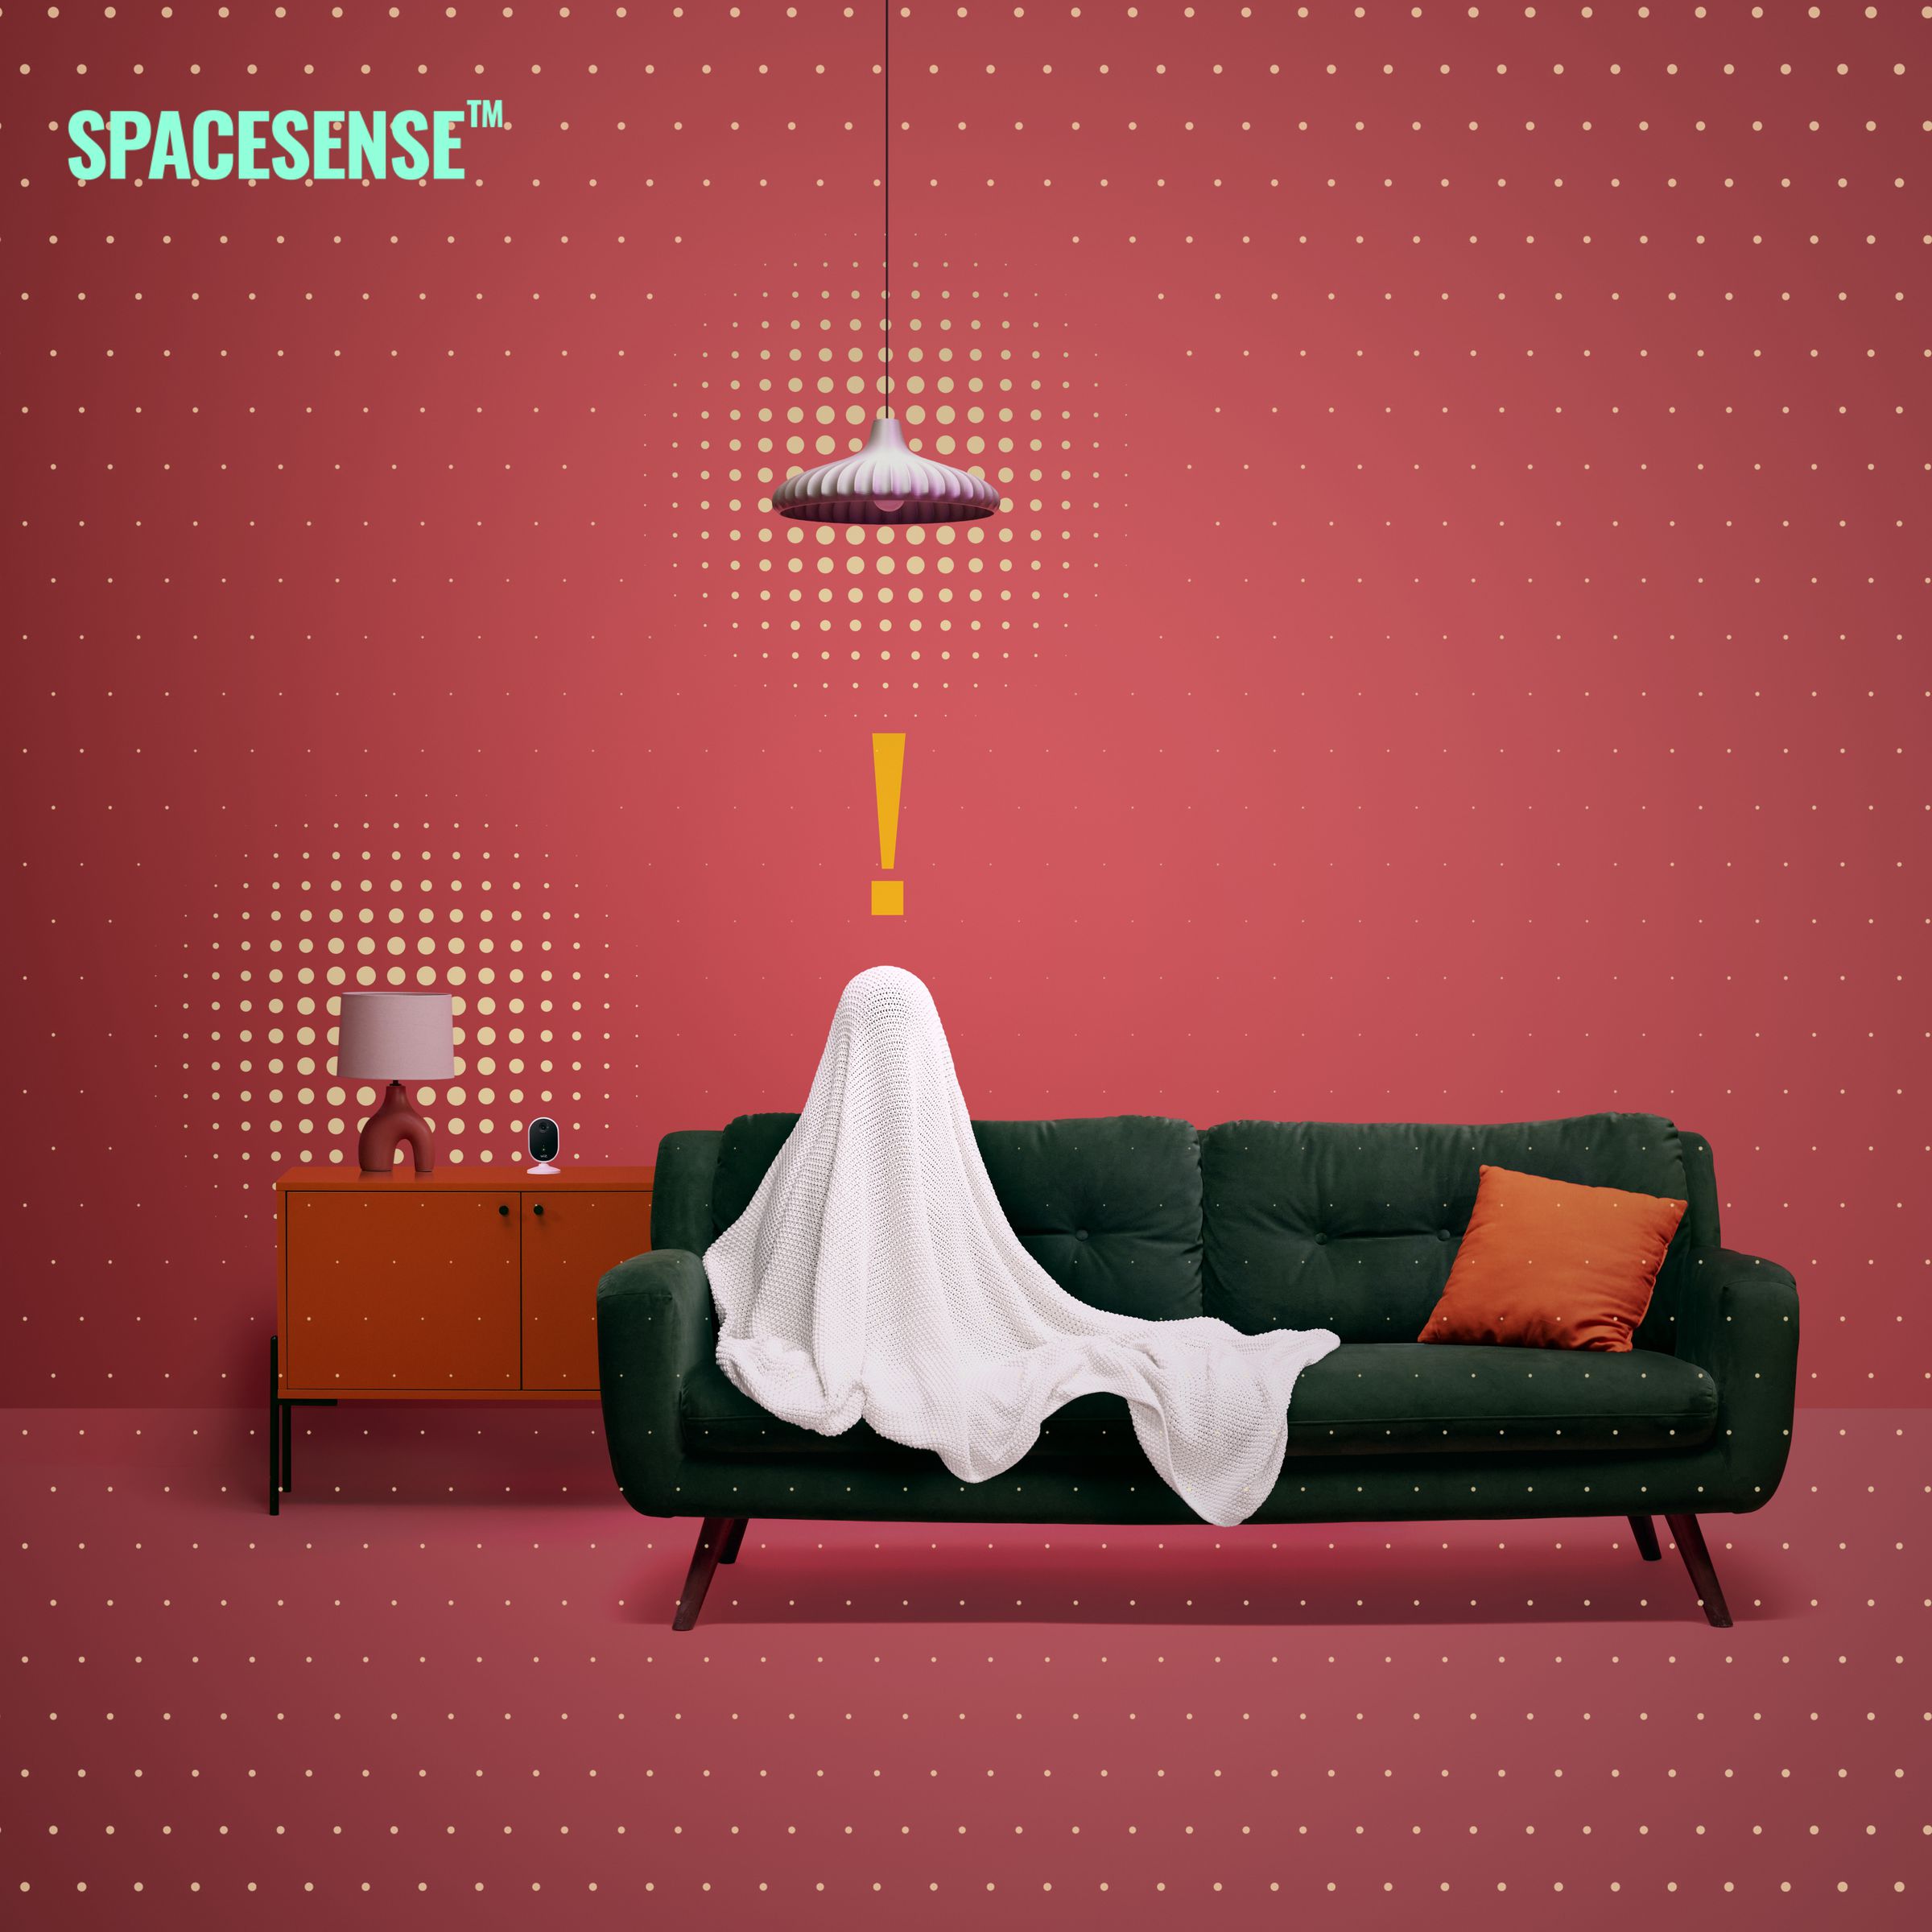 WiZ’s SpaceSense technology uses Wi-Fi signals to detect people in a room. At least, we think that’s what this image is trying to tell us... .